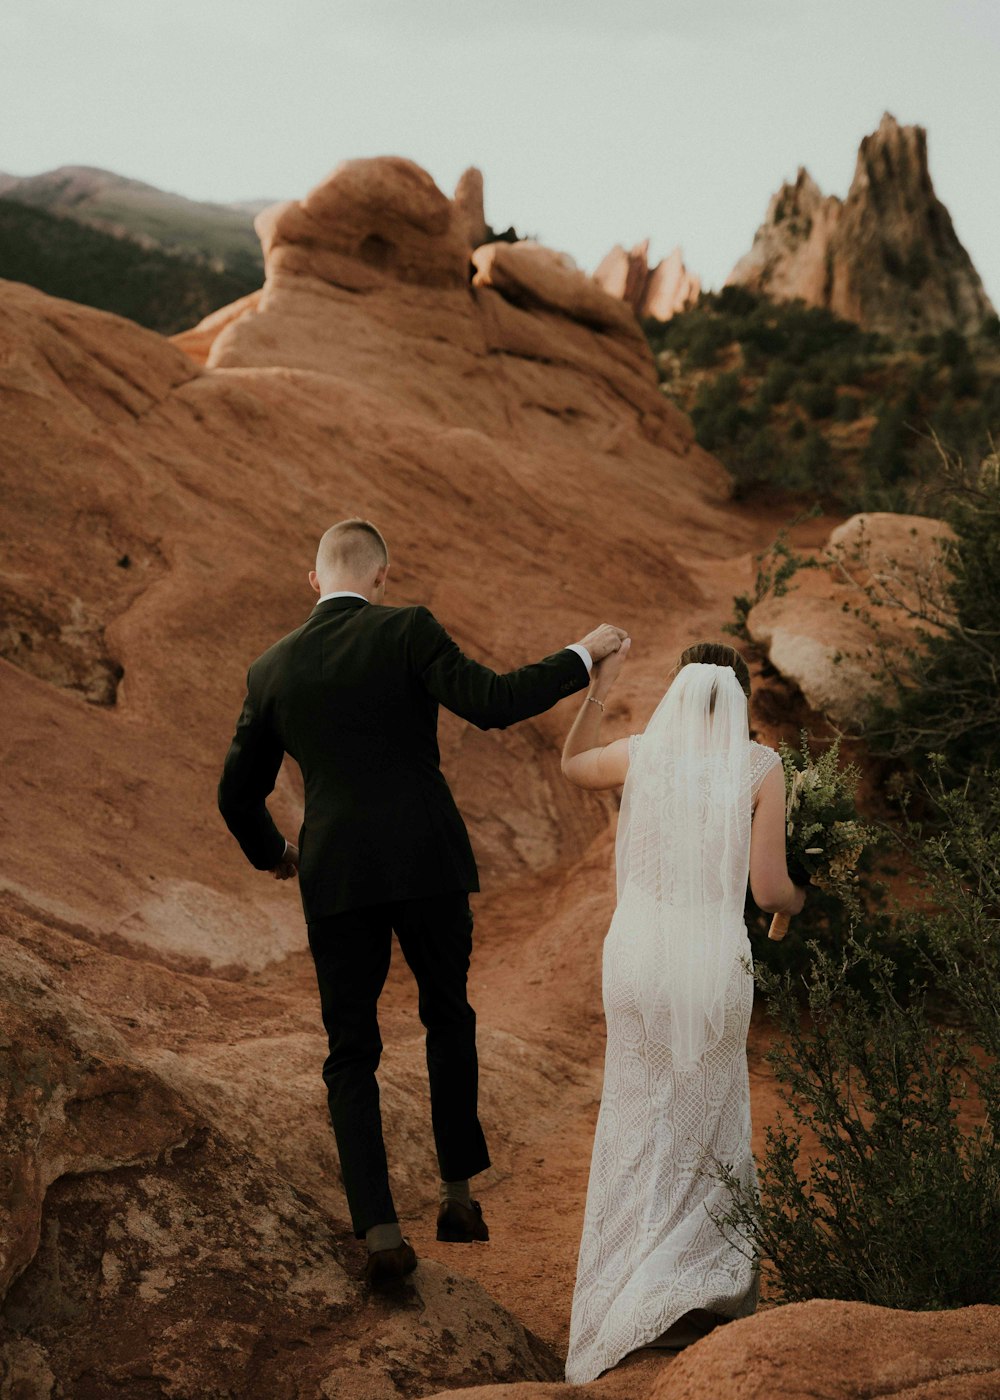 a man and woman walking on a rocky path